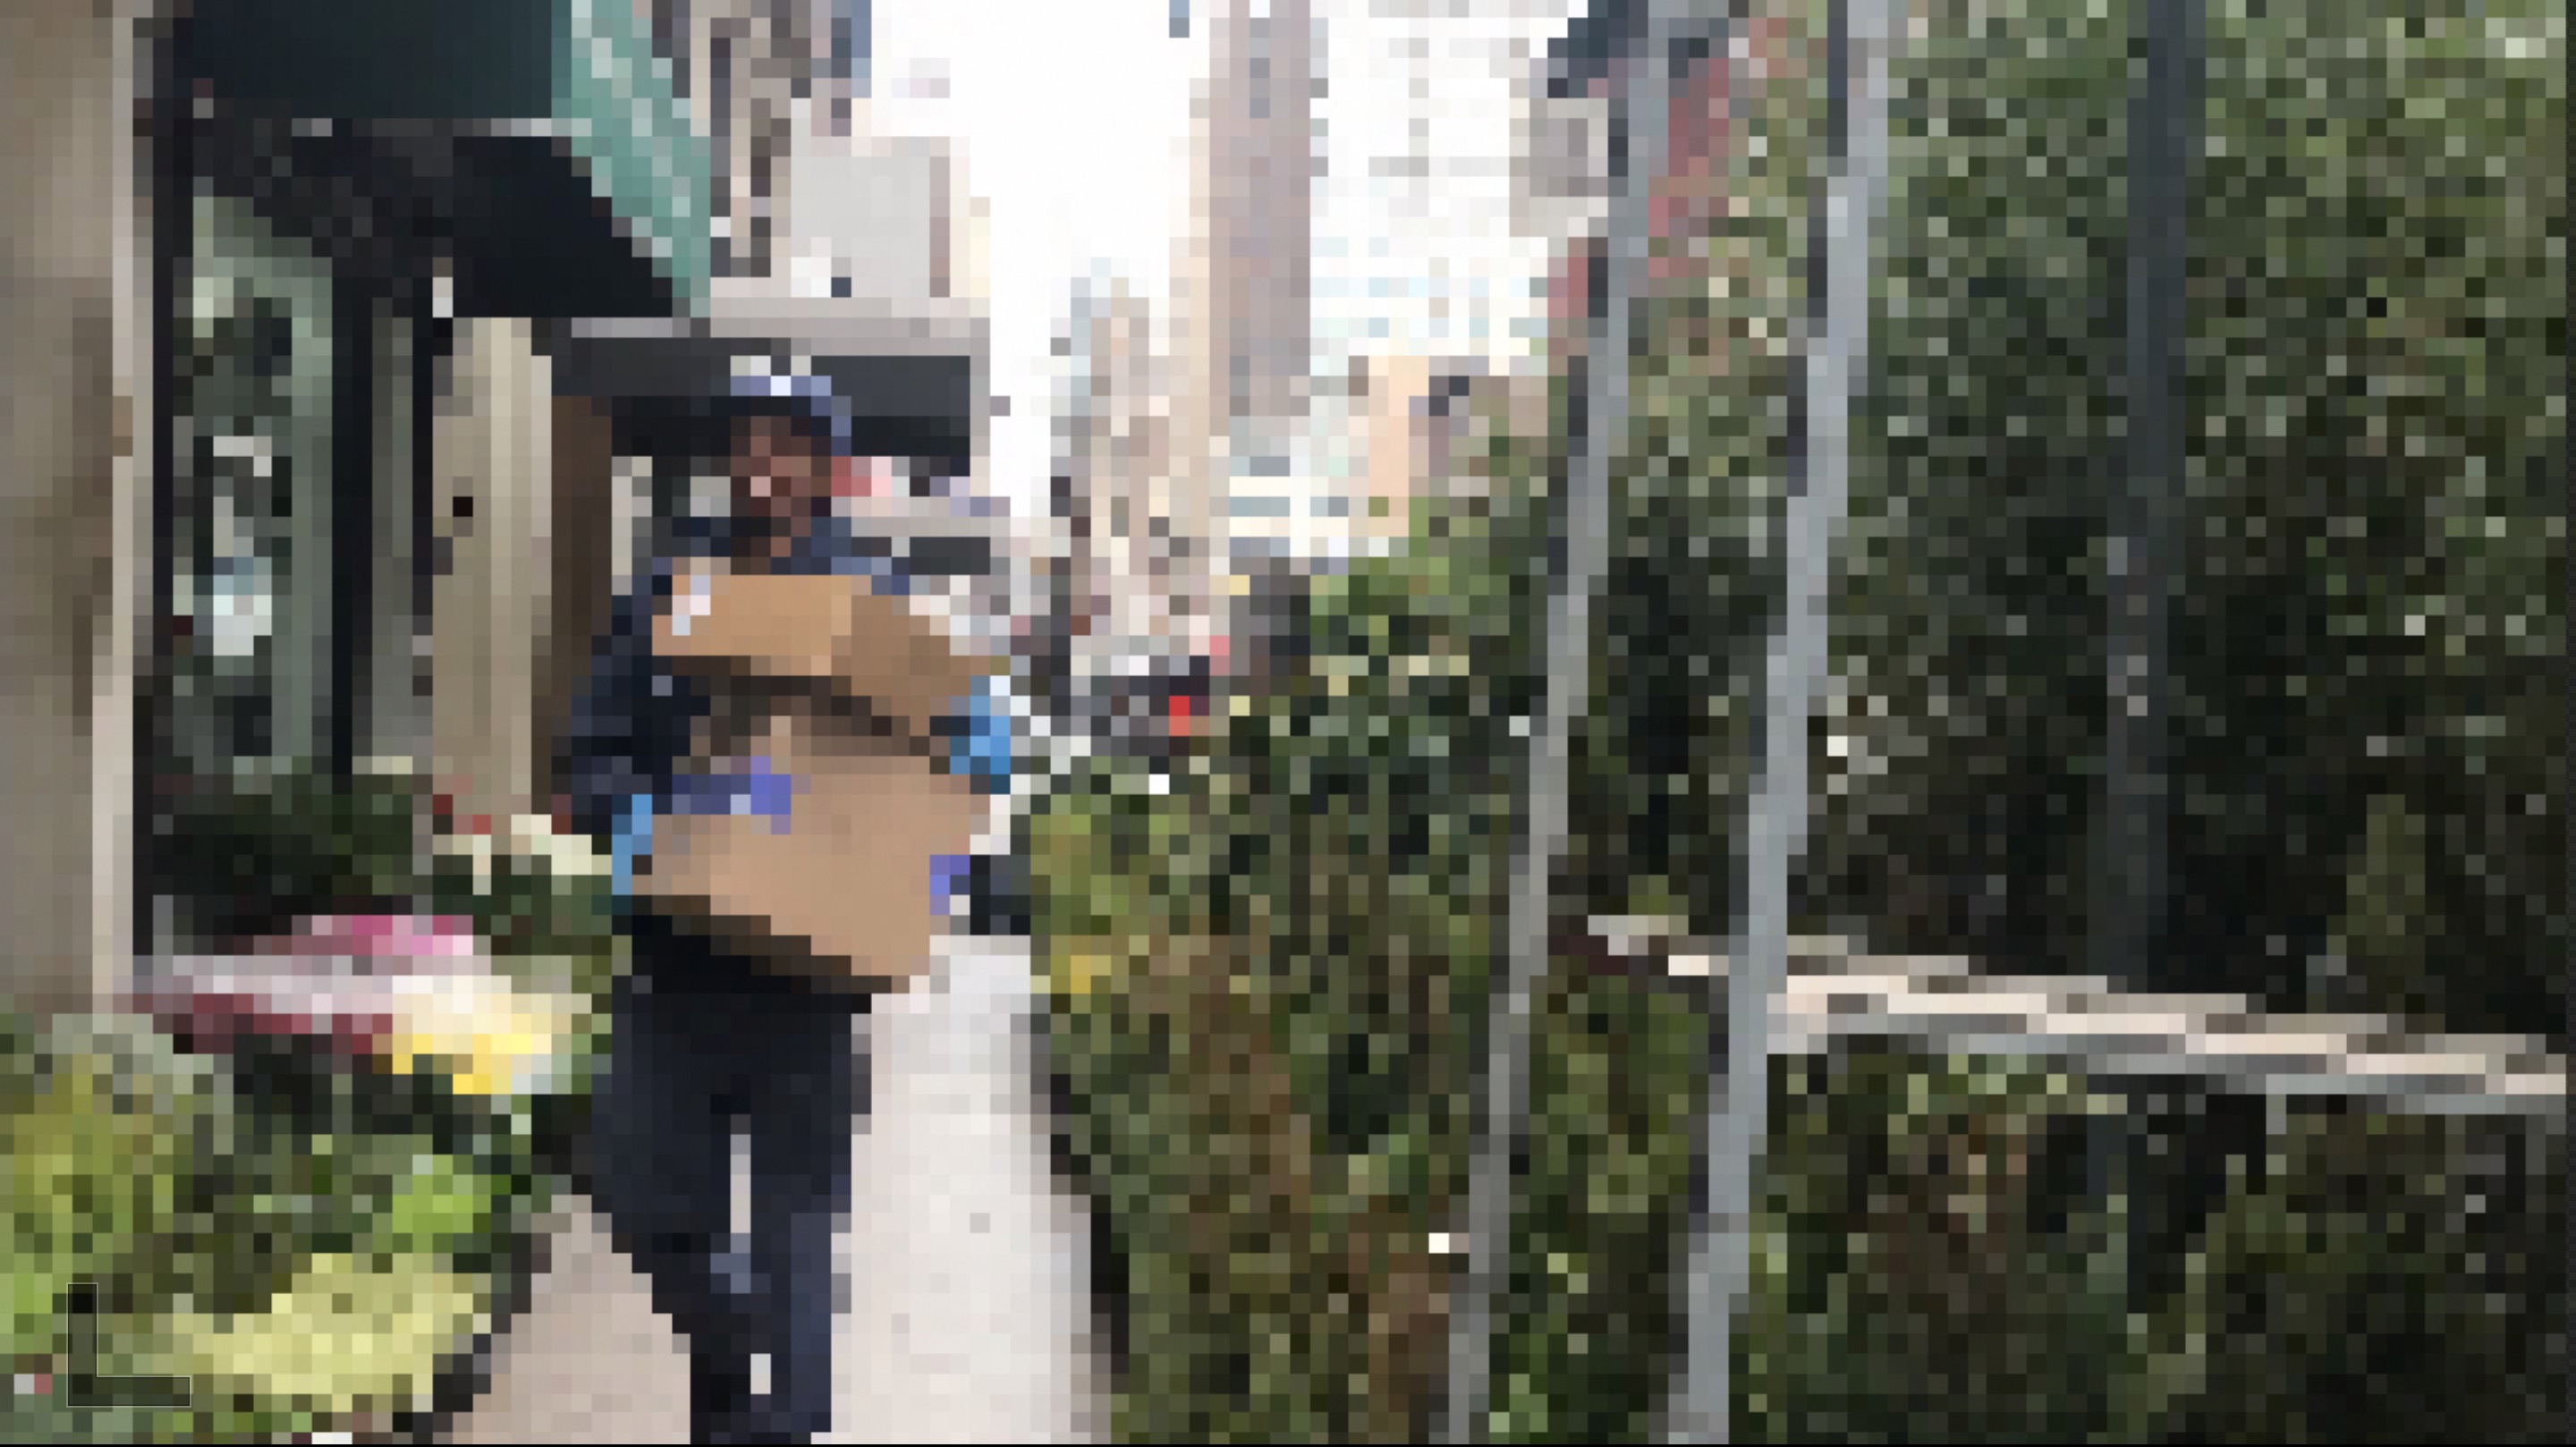 A pixelated photo of a man carrying two boxes on the street through midtown Manhattan between many potted plants on the ground and on shelves